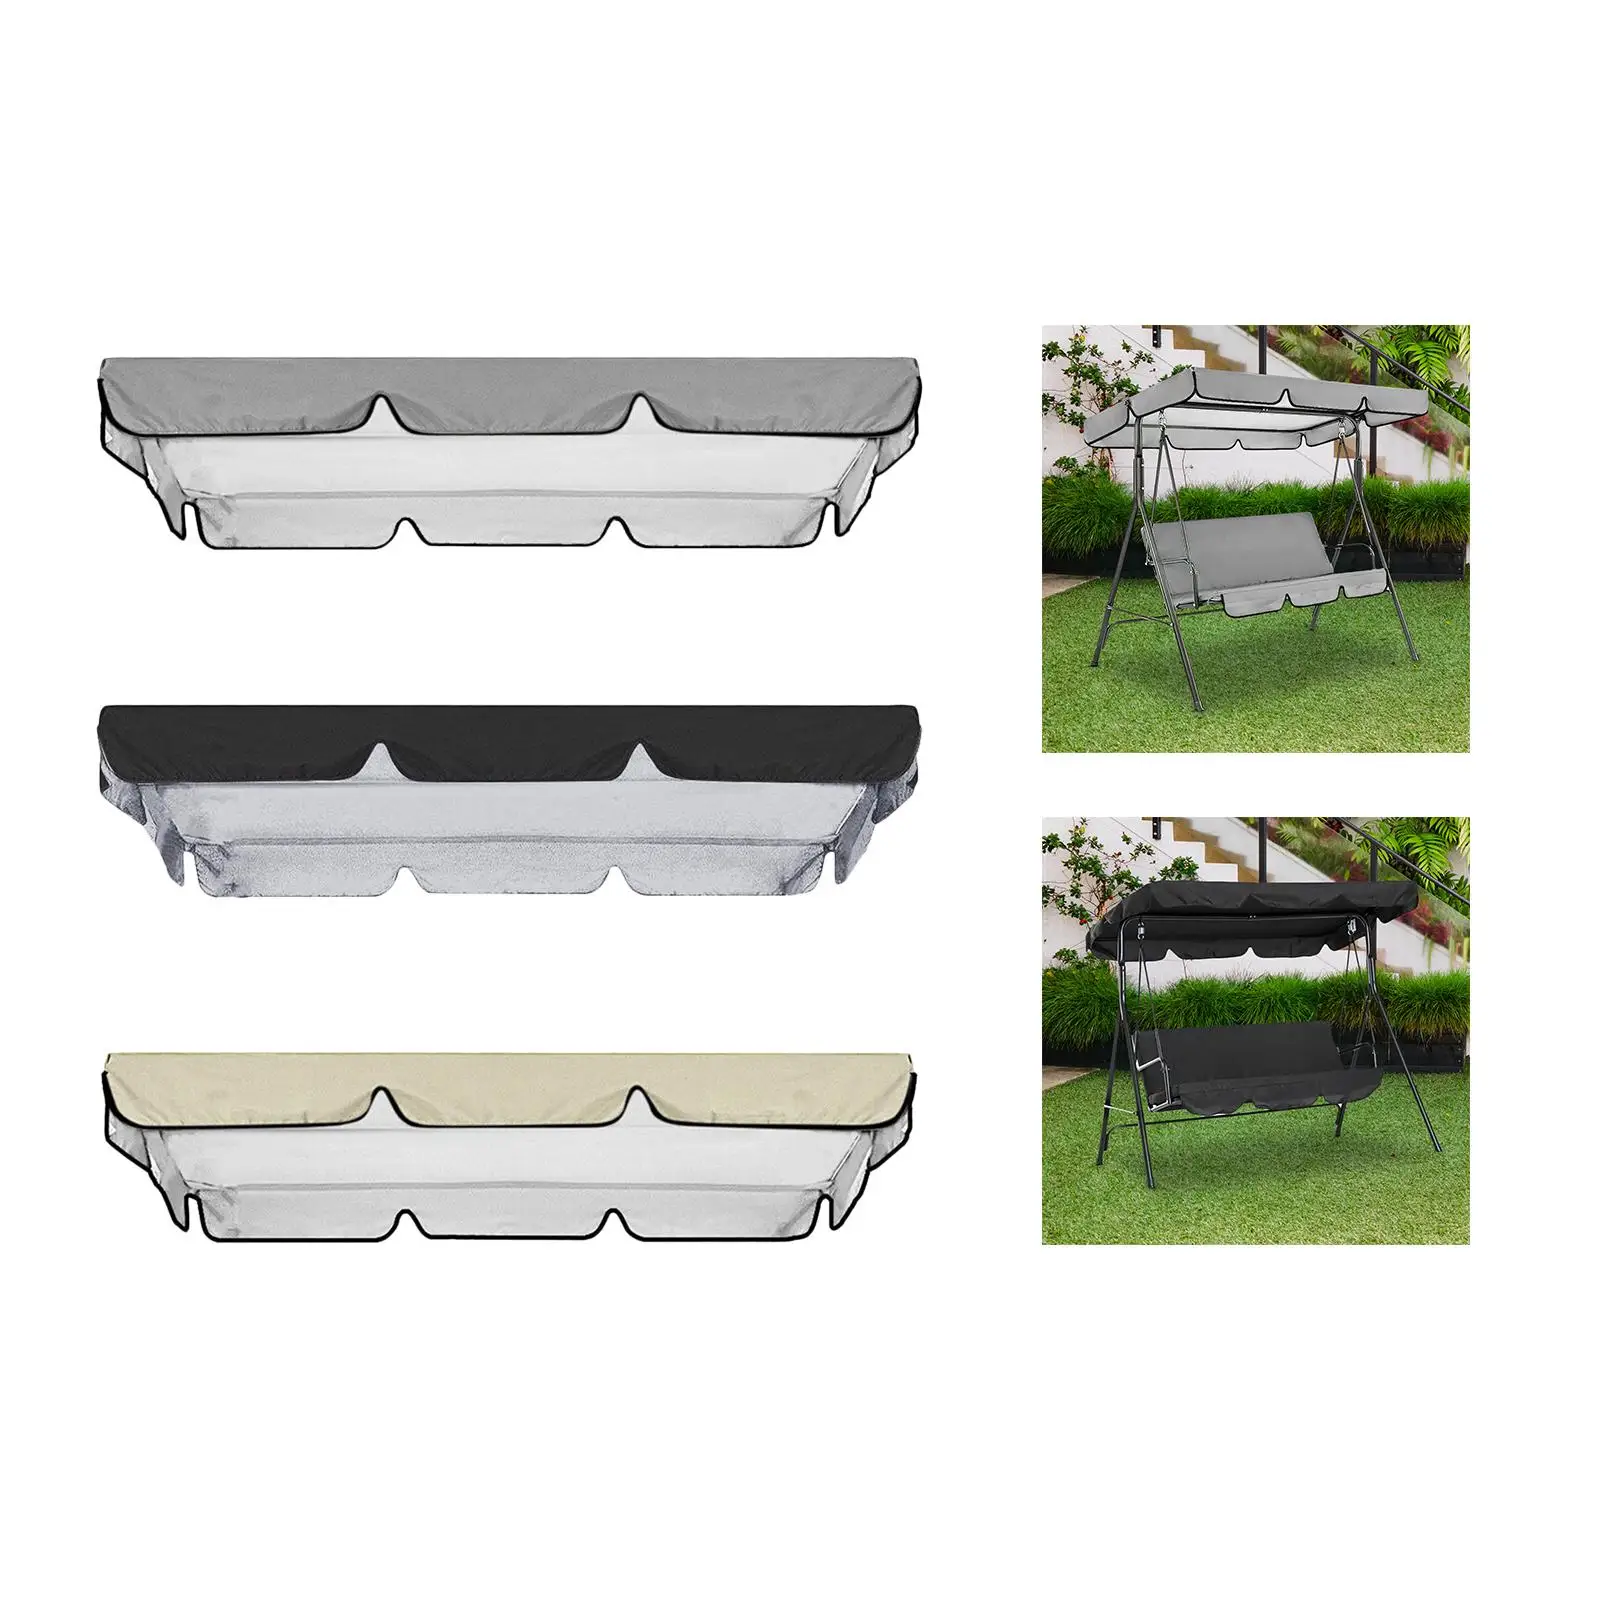 Swing Canopy Replacement Top Cover Sun Shade Waterproof Easy to Install Swing Top Cover for Yard Hammock Bench Seat Garden Party